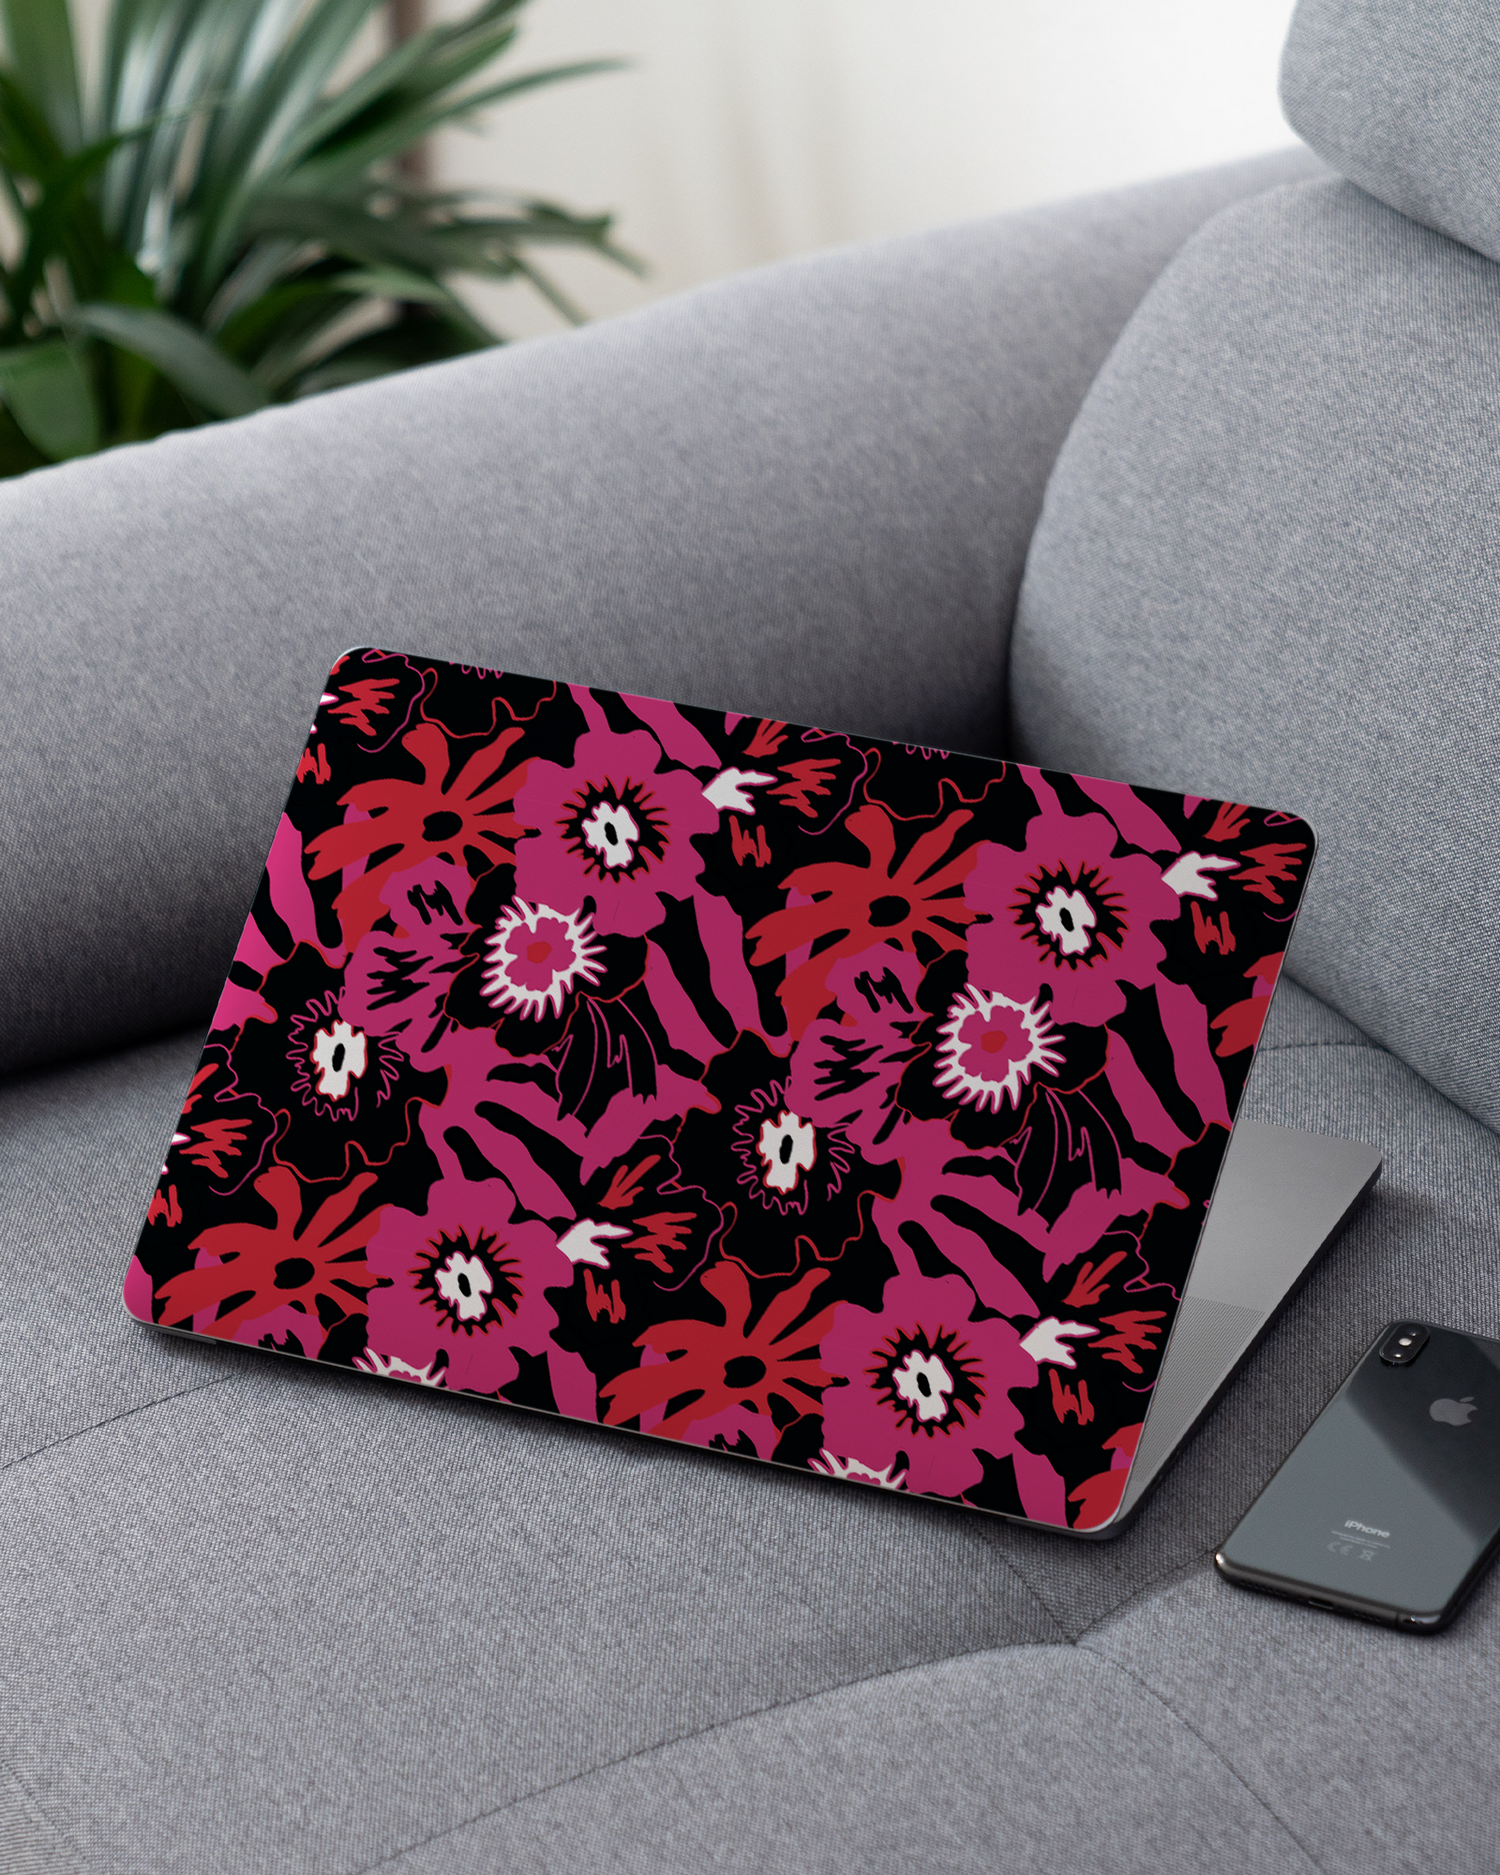 Flower Works Laptop Skin for 13 inch Apple MacBooks on a couch